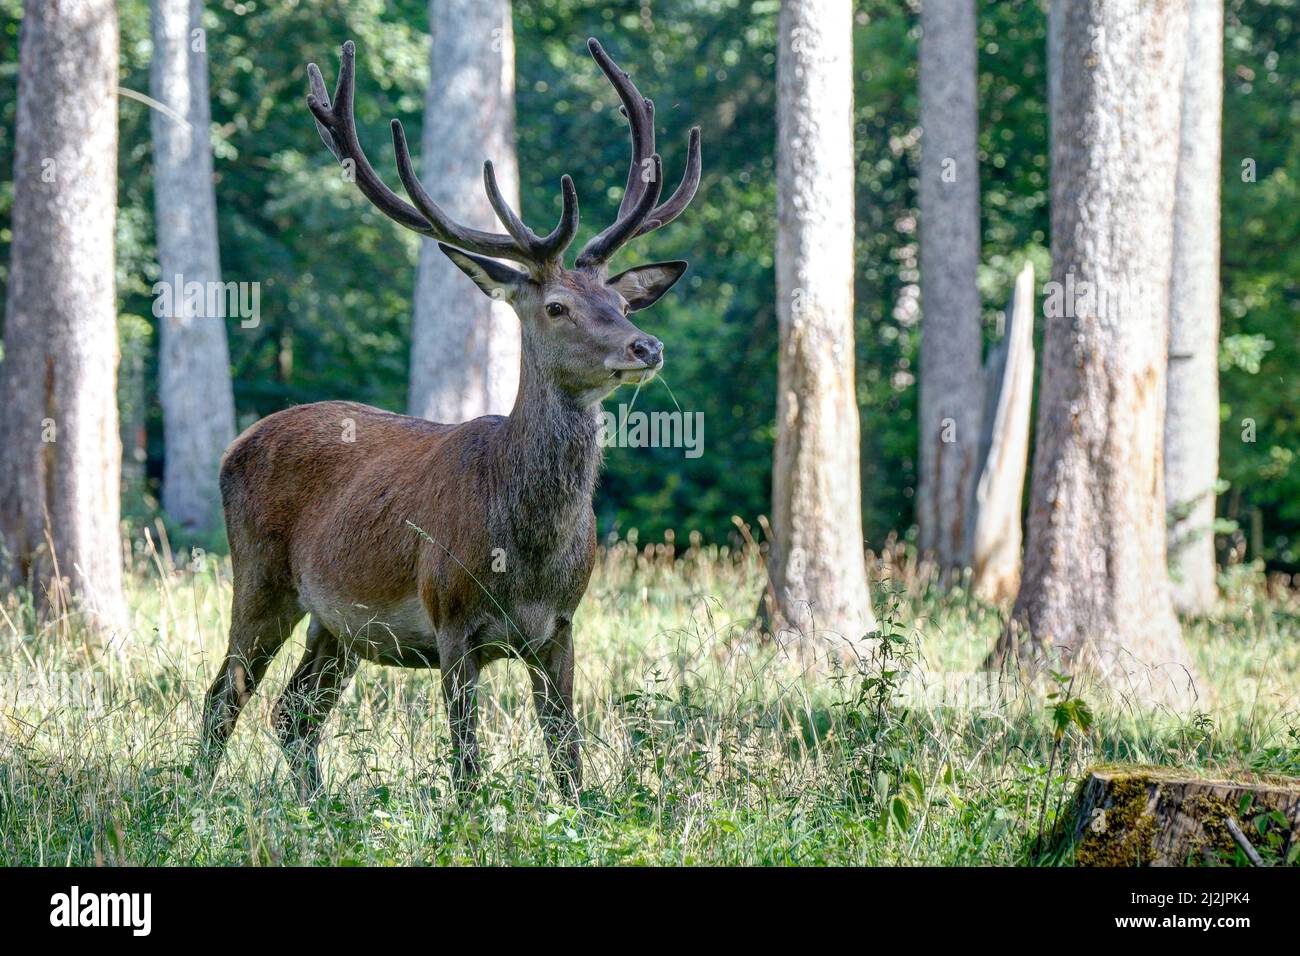 In the Black Forest Nature Park, a large red deer stands grazing in a forest clearing. Stock Photo